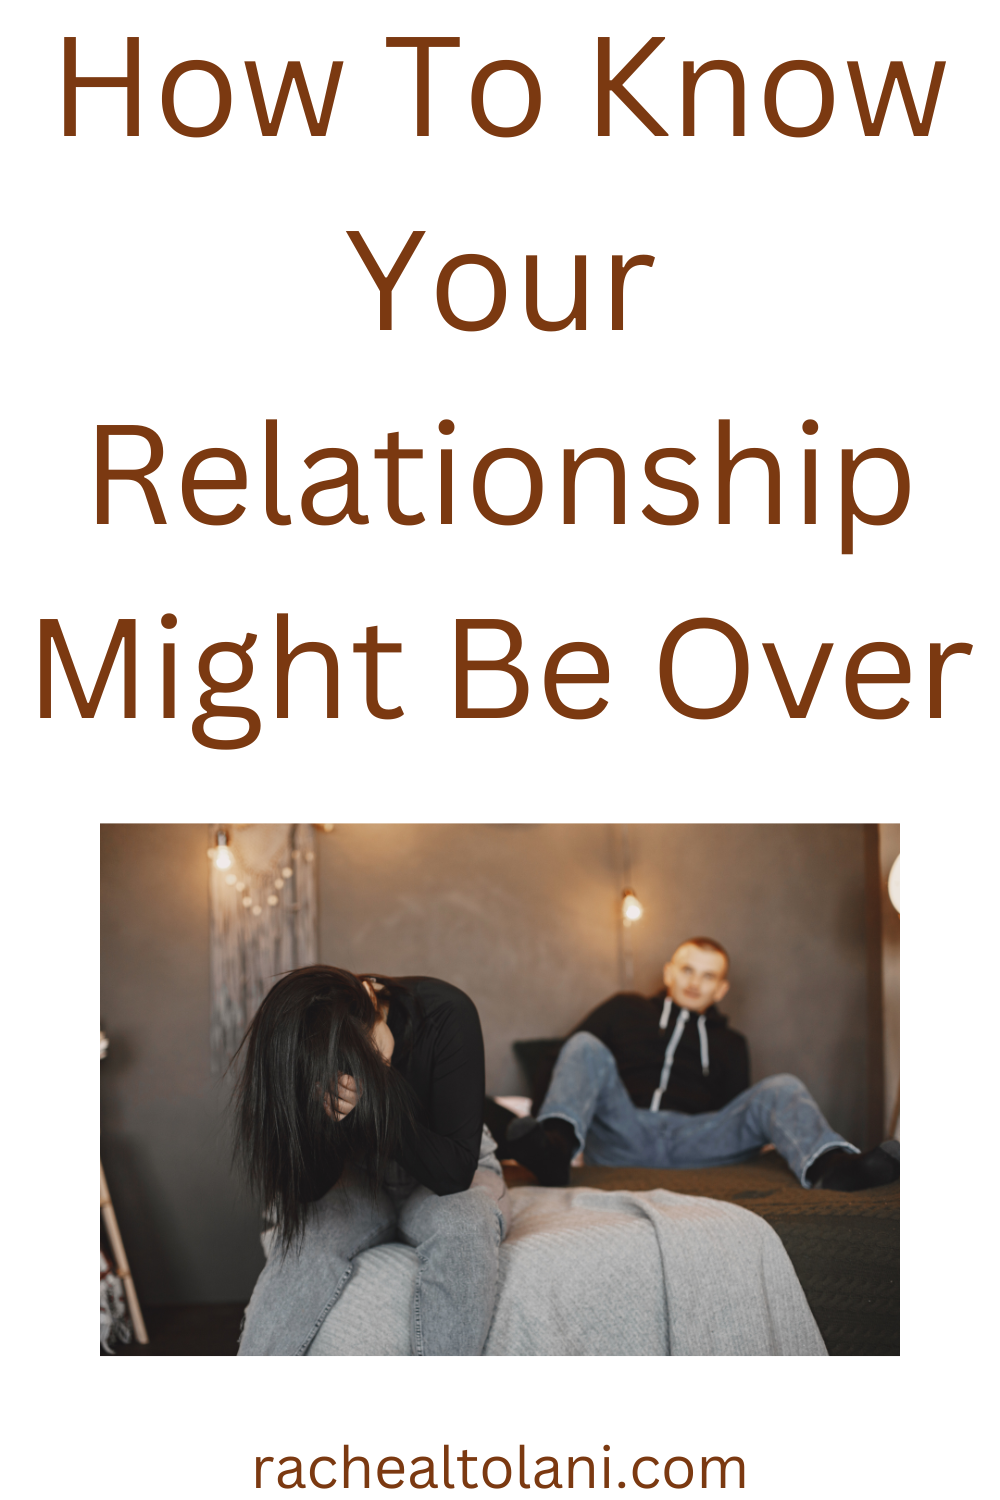 How to know your relationship is over